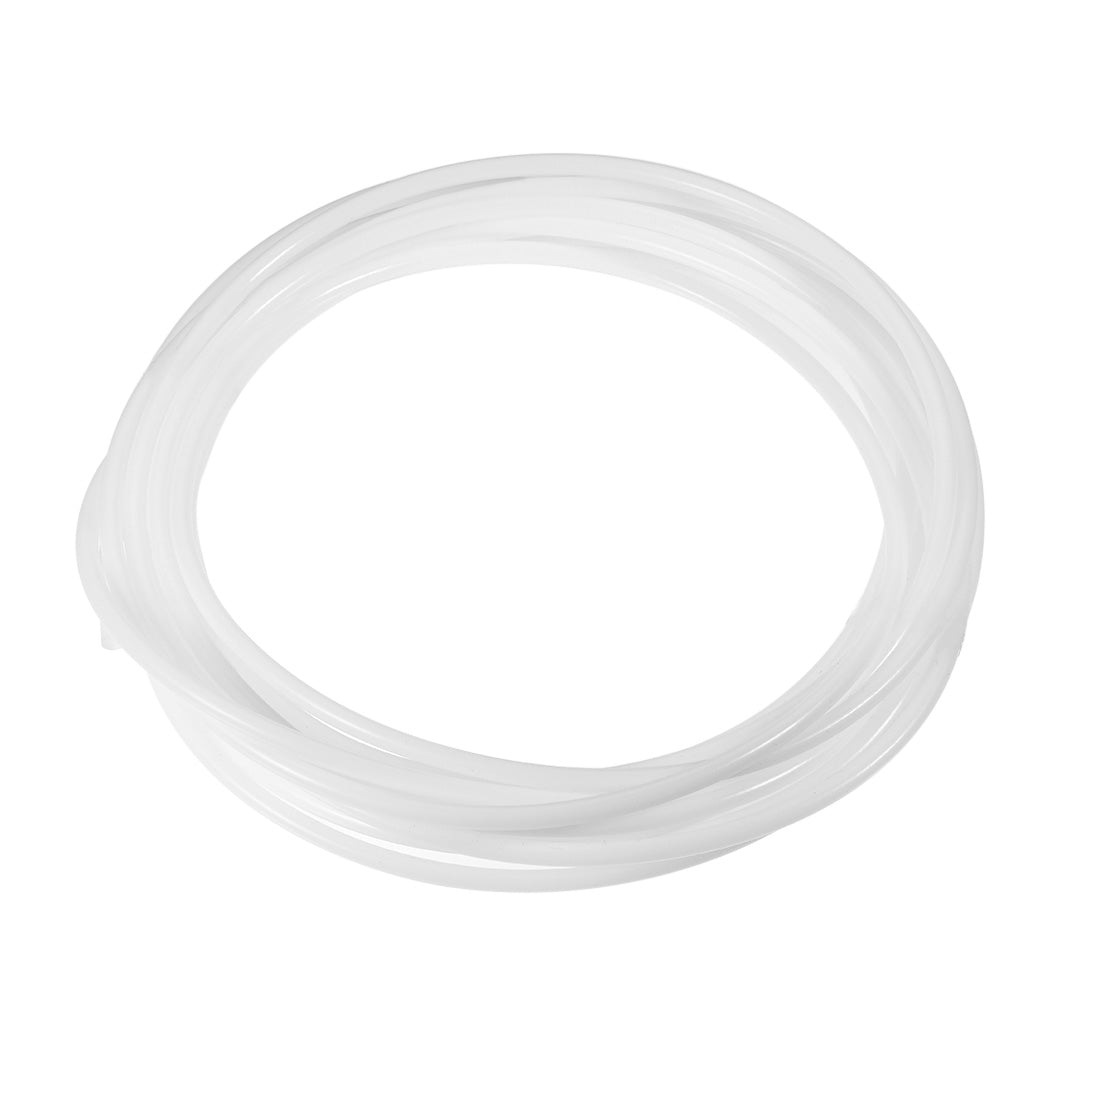 uxcell Uxcell PTFE Tube 26Ft - ID 4mm x OD 6mm Fit 3mm Filament for 3D Printer White